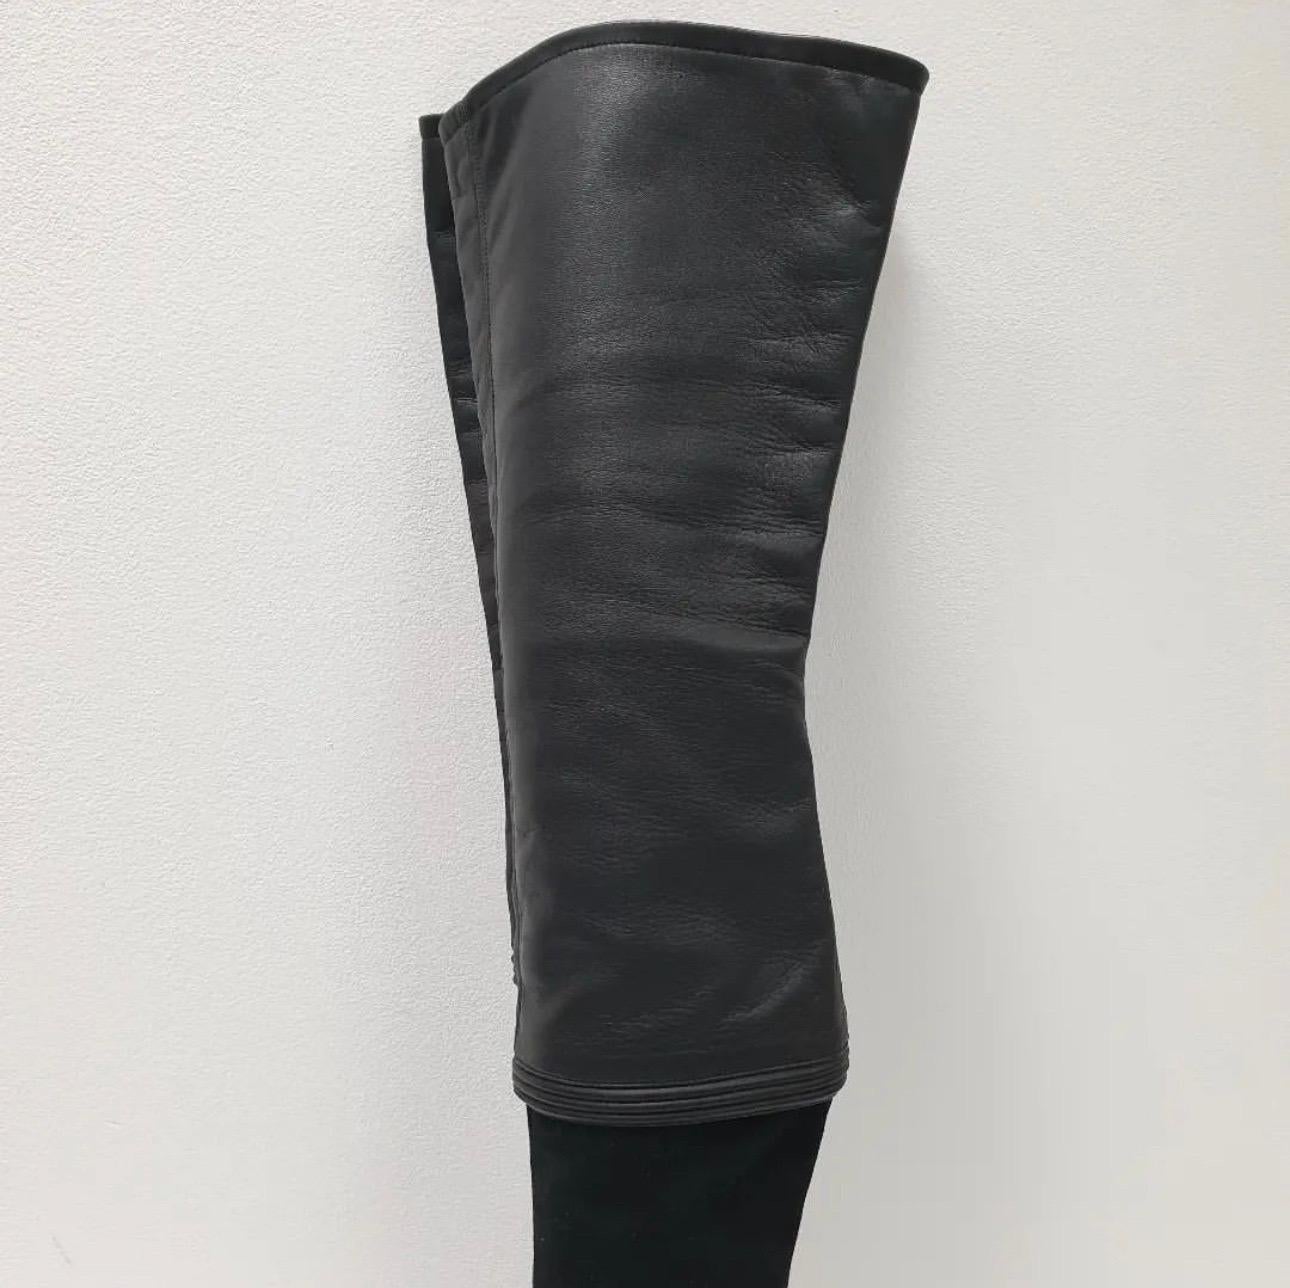 Chanel Black Suede Leather Over Knee Boots In Good Condition For Sale In Krakow, PL